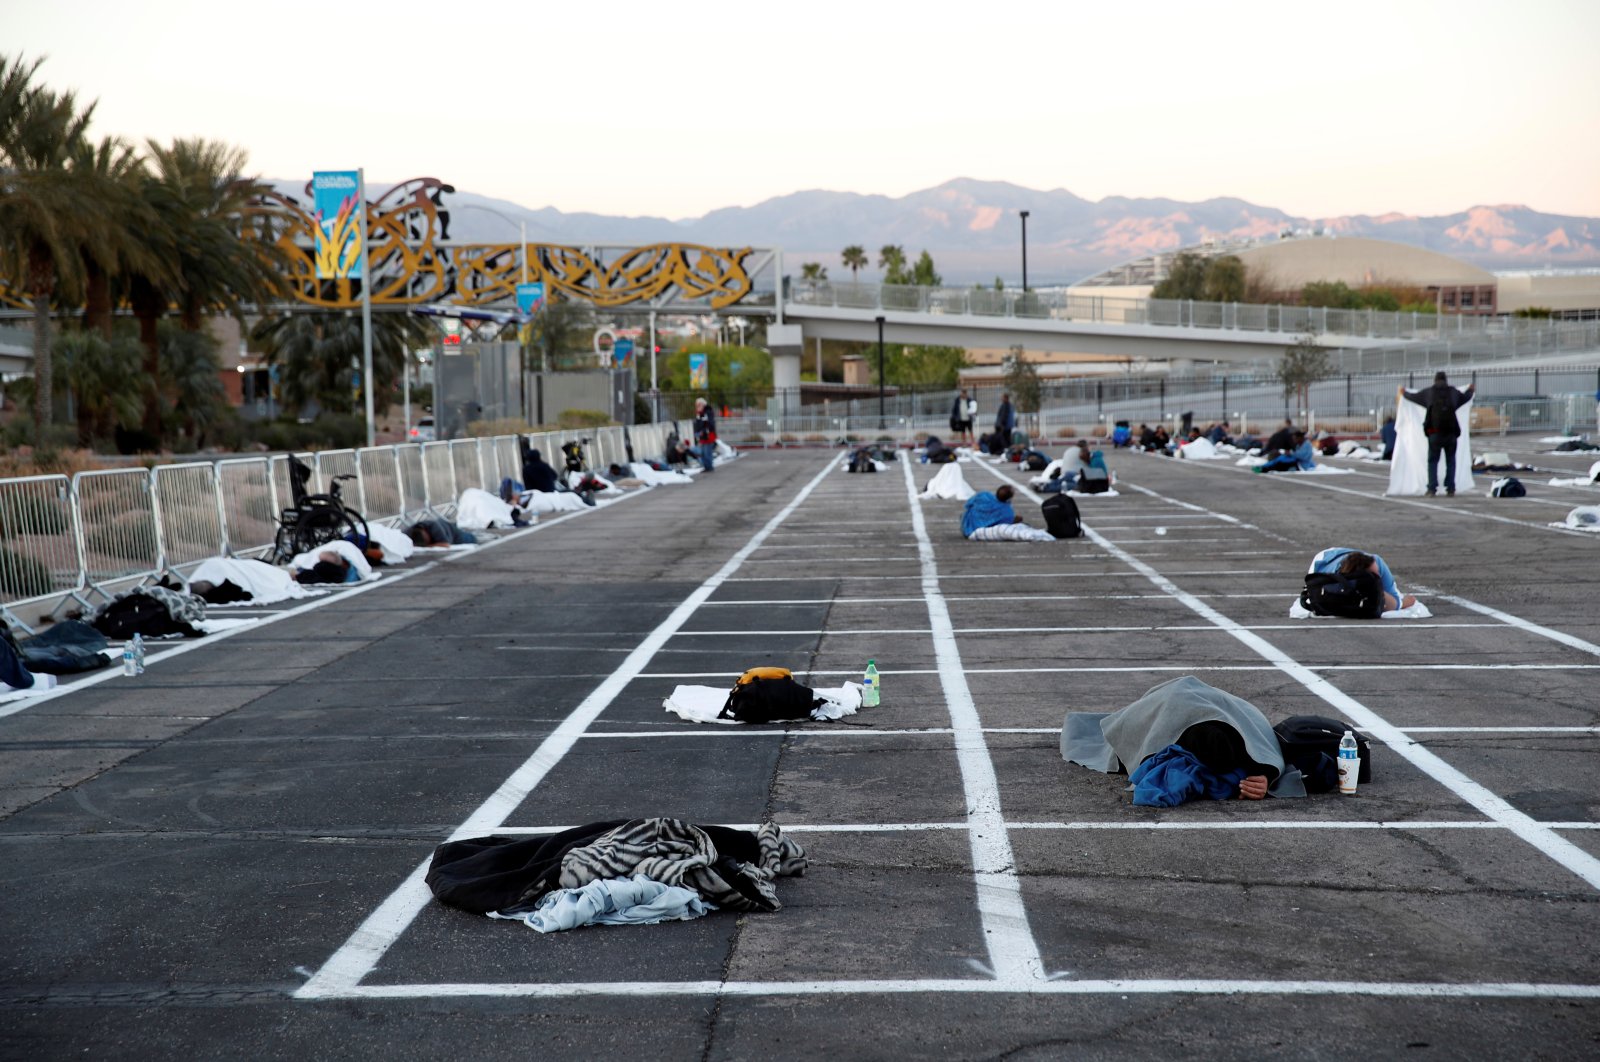 Homeless people sleep in a temporary parking lot shelter at Cashman Center, with spaces marked for social distancing to help slow the spread of coronavirus disease (COVID-19) in Las Vegas, Nevada, U.S., Monday, March 30, 2020. (Reuters Photo)